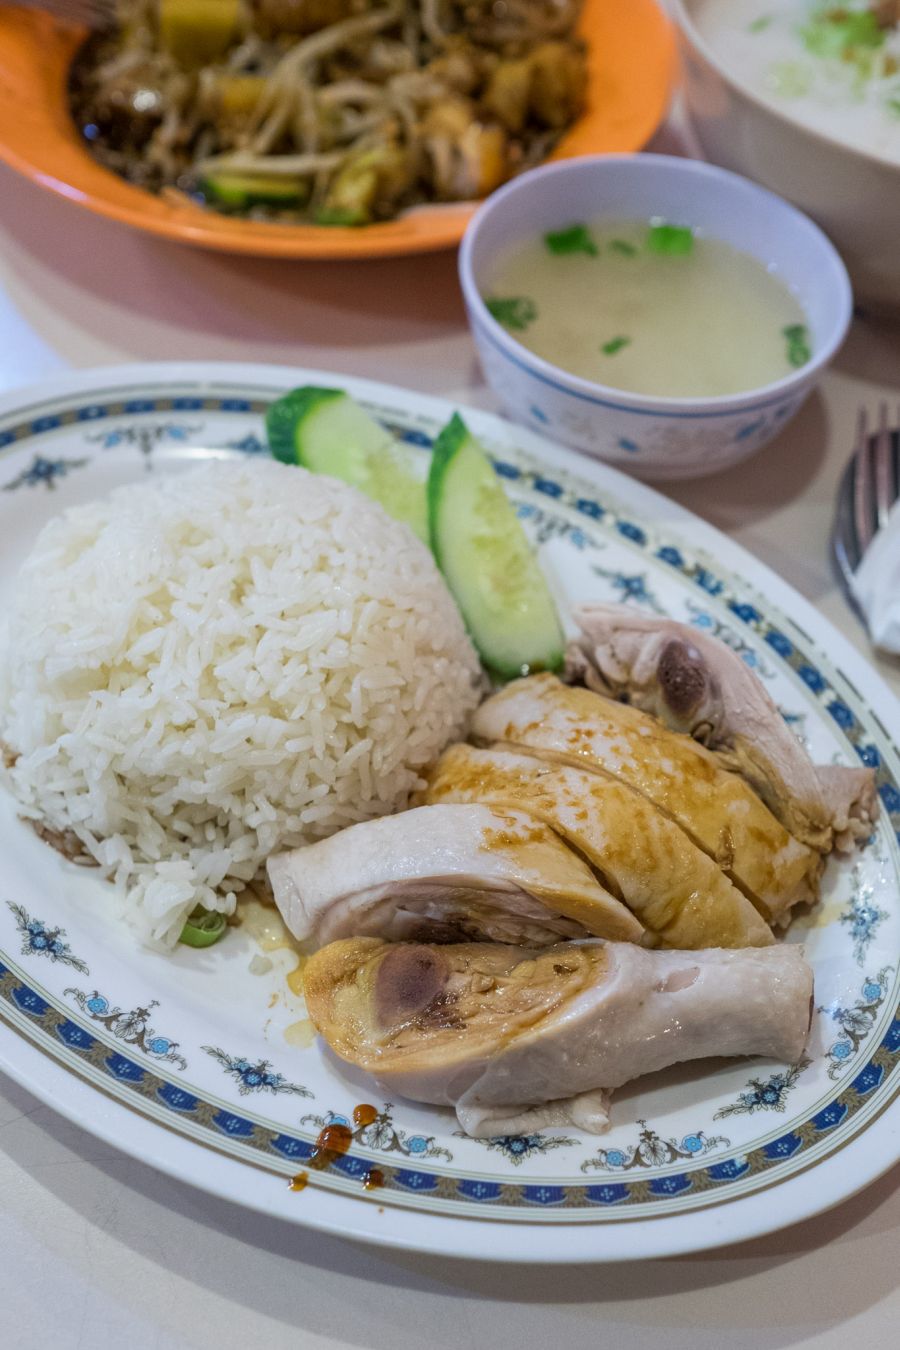 Hainanese chicken rice (AU$7.50) - with chicken, cucumber and soup